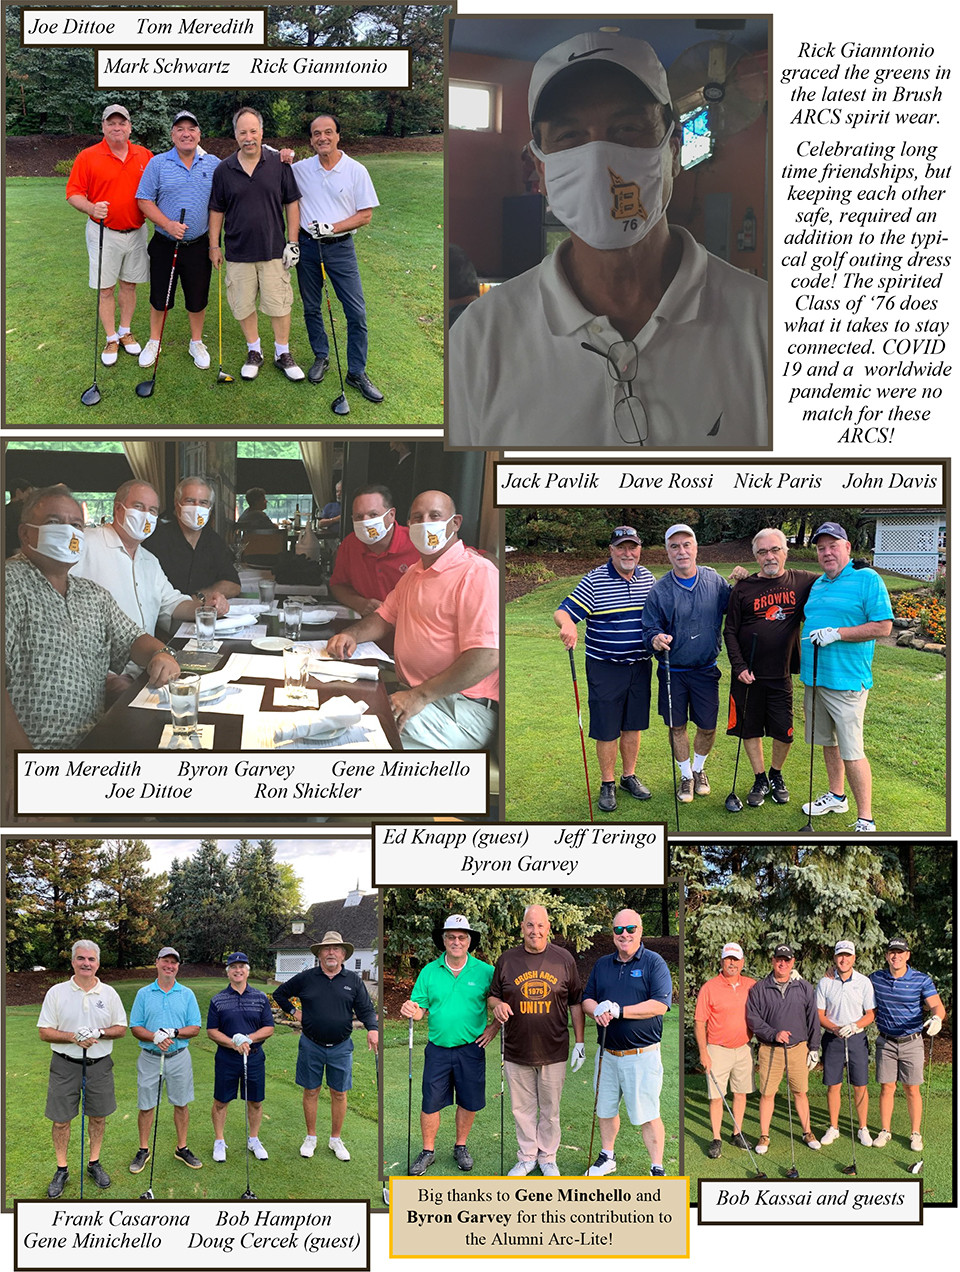 Gallery of photos from the Class of '76 Brush ARC's 5th Annual Golf Extravaganza.